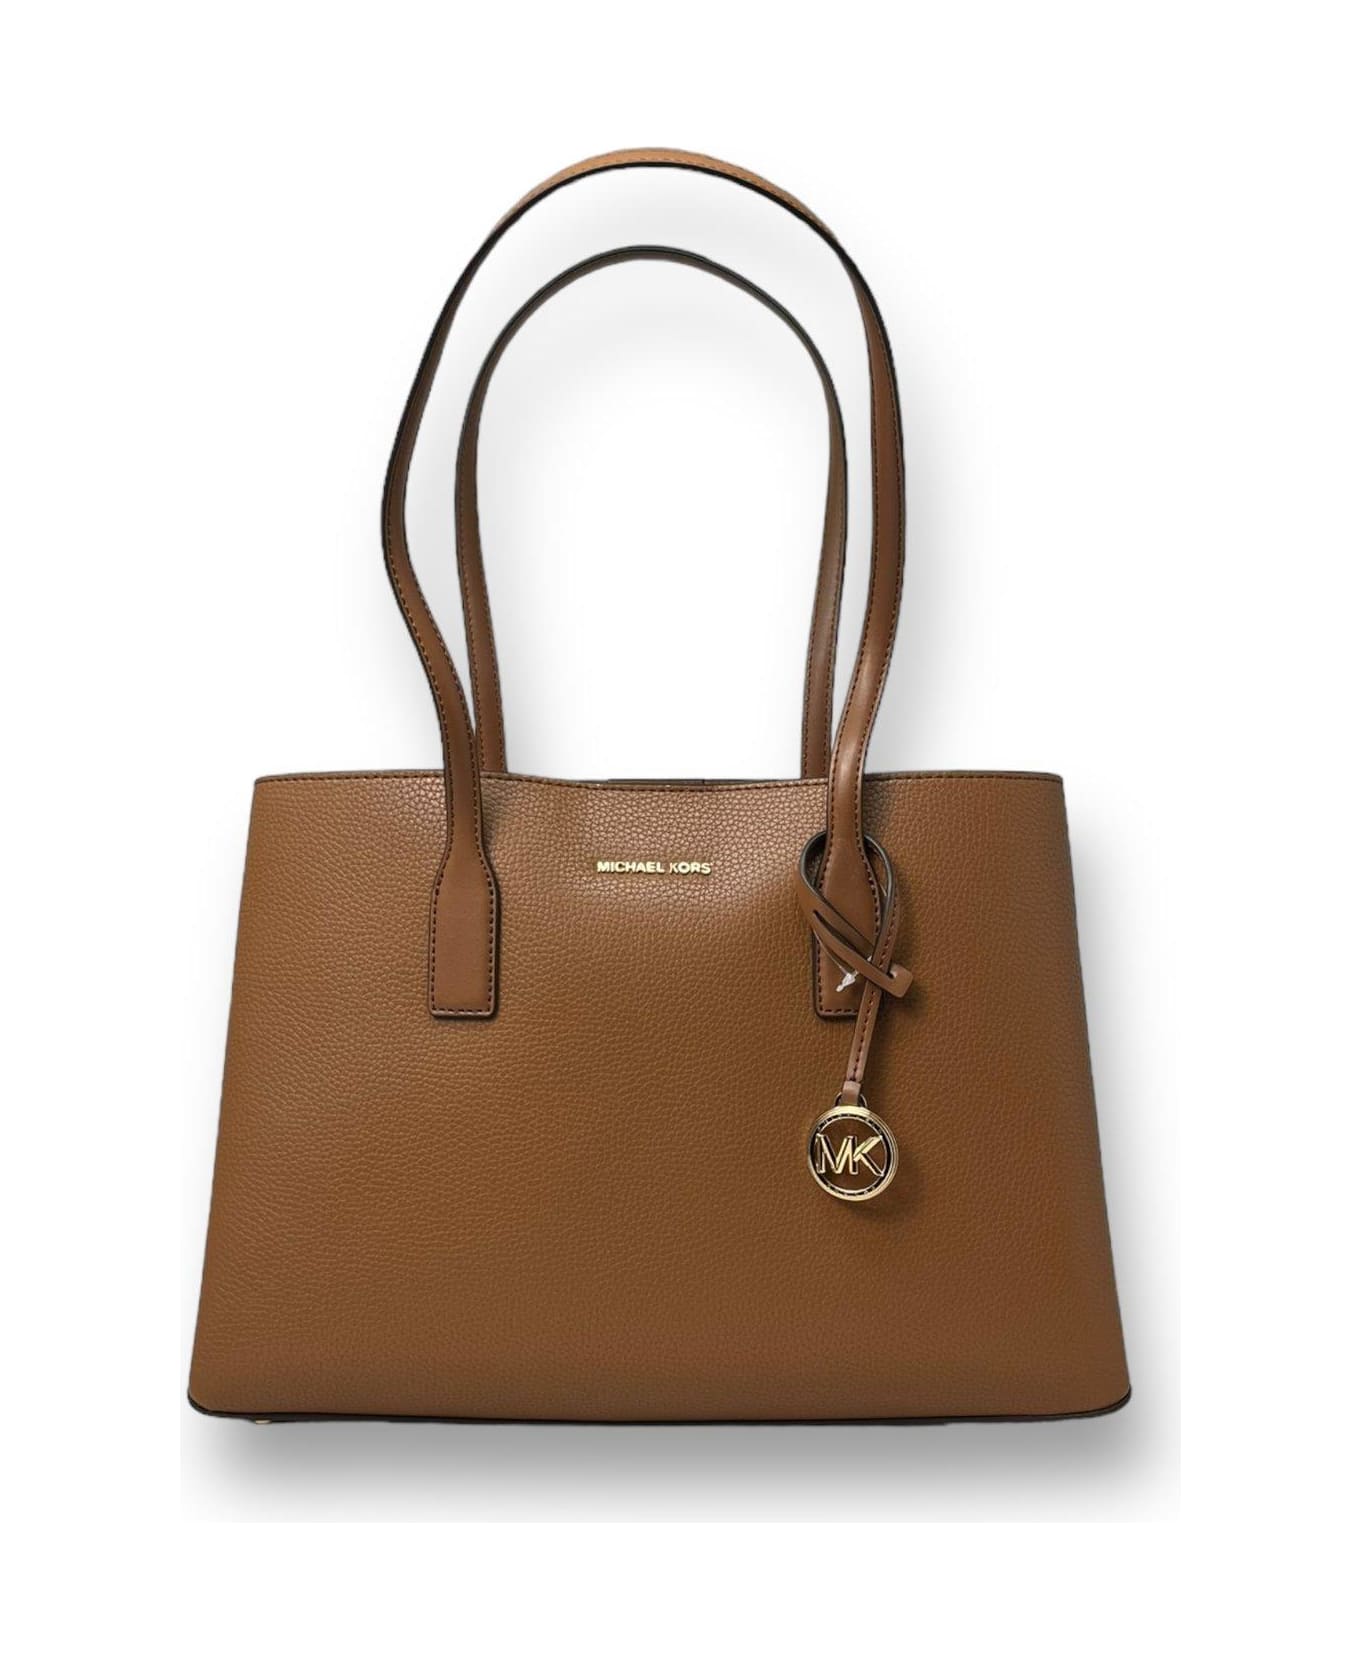 Michael Kors Collection Ruthie Medium Top Handle Bag - Luggage トートバッグ